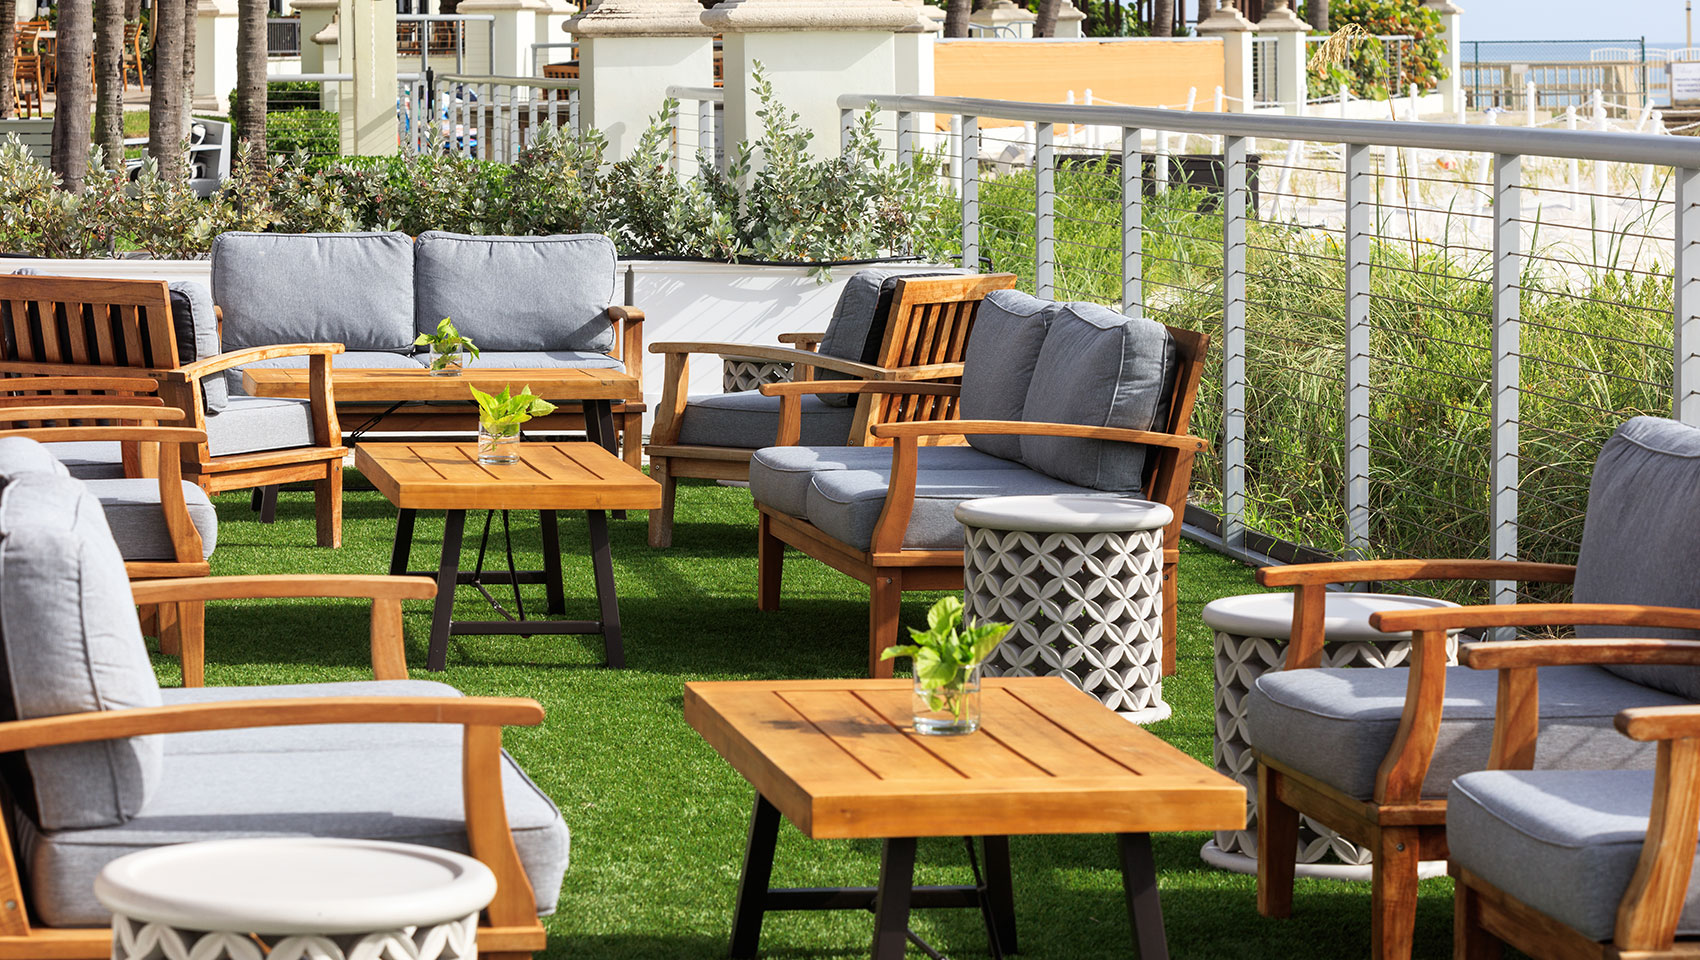 Outdoor dining at Heaton’s Reef